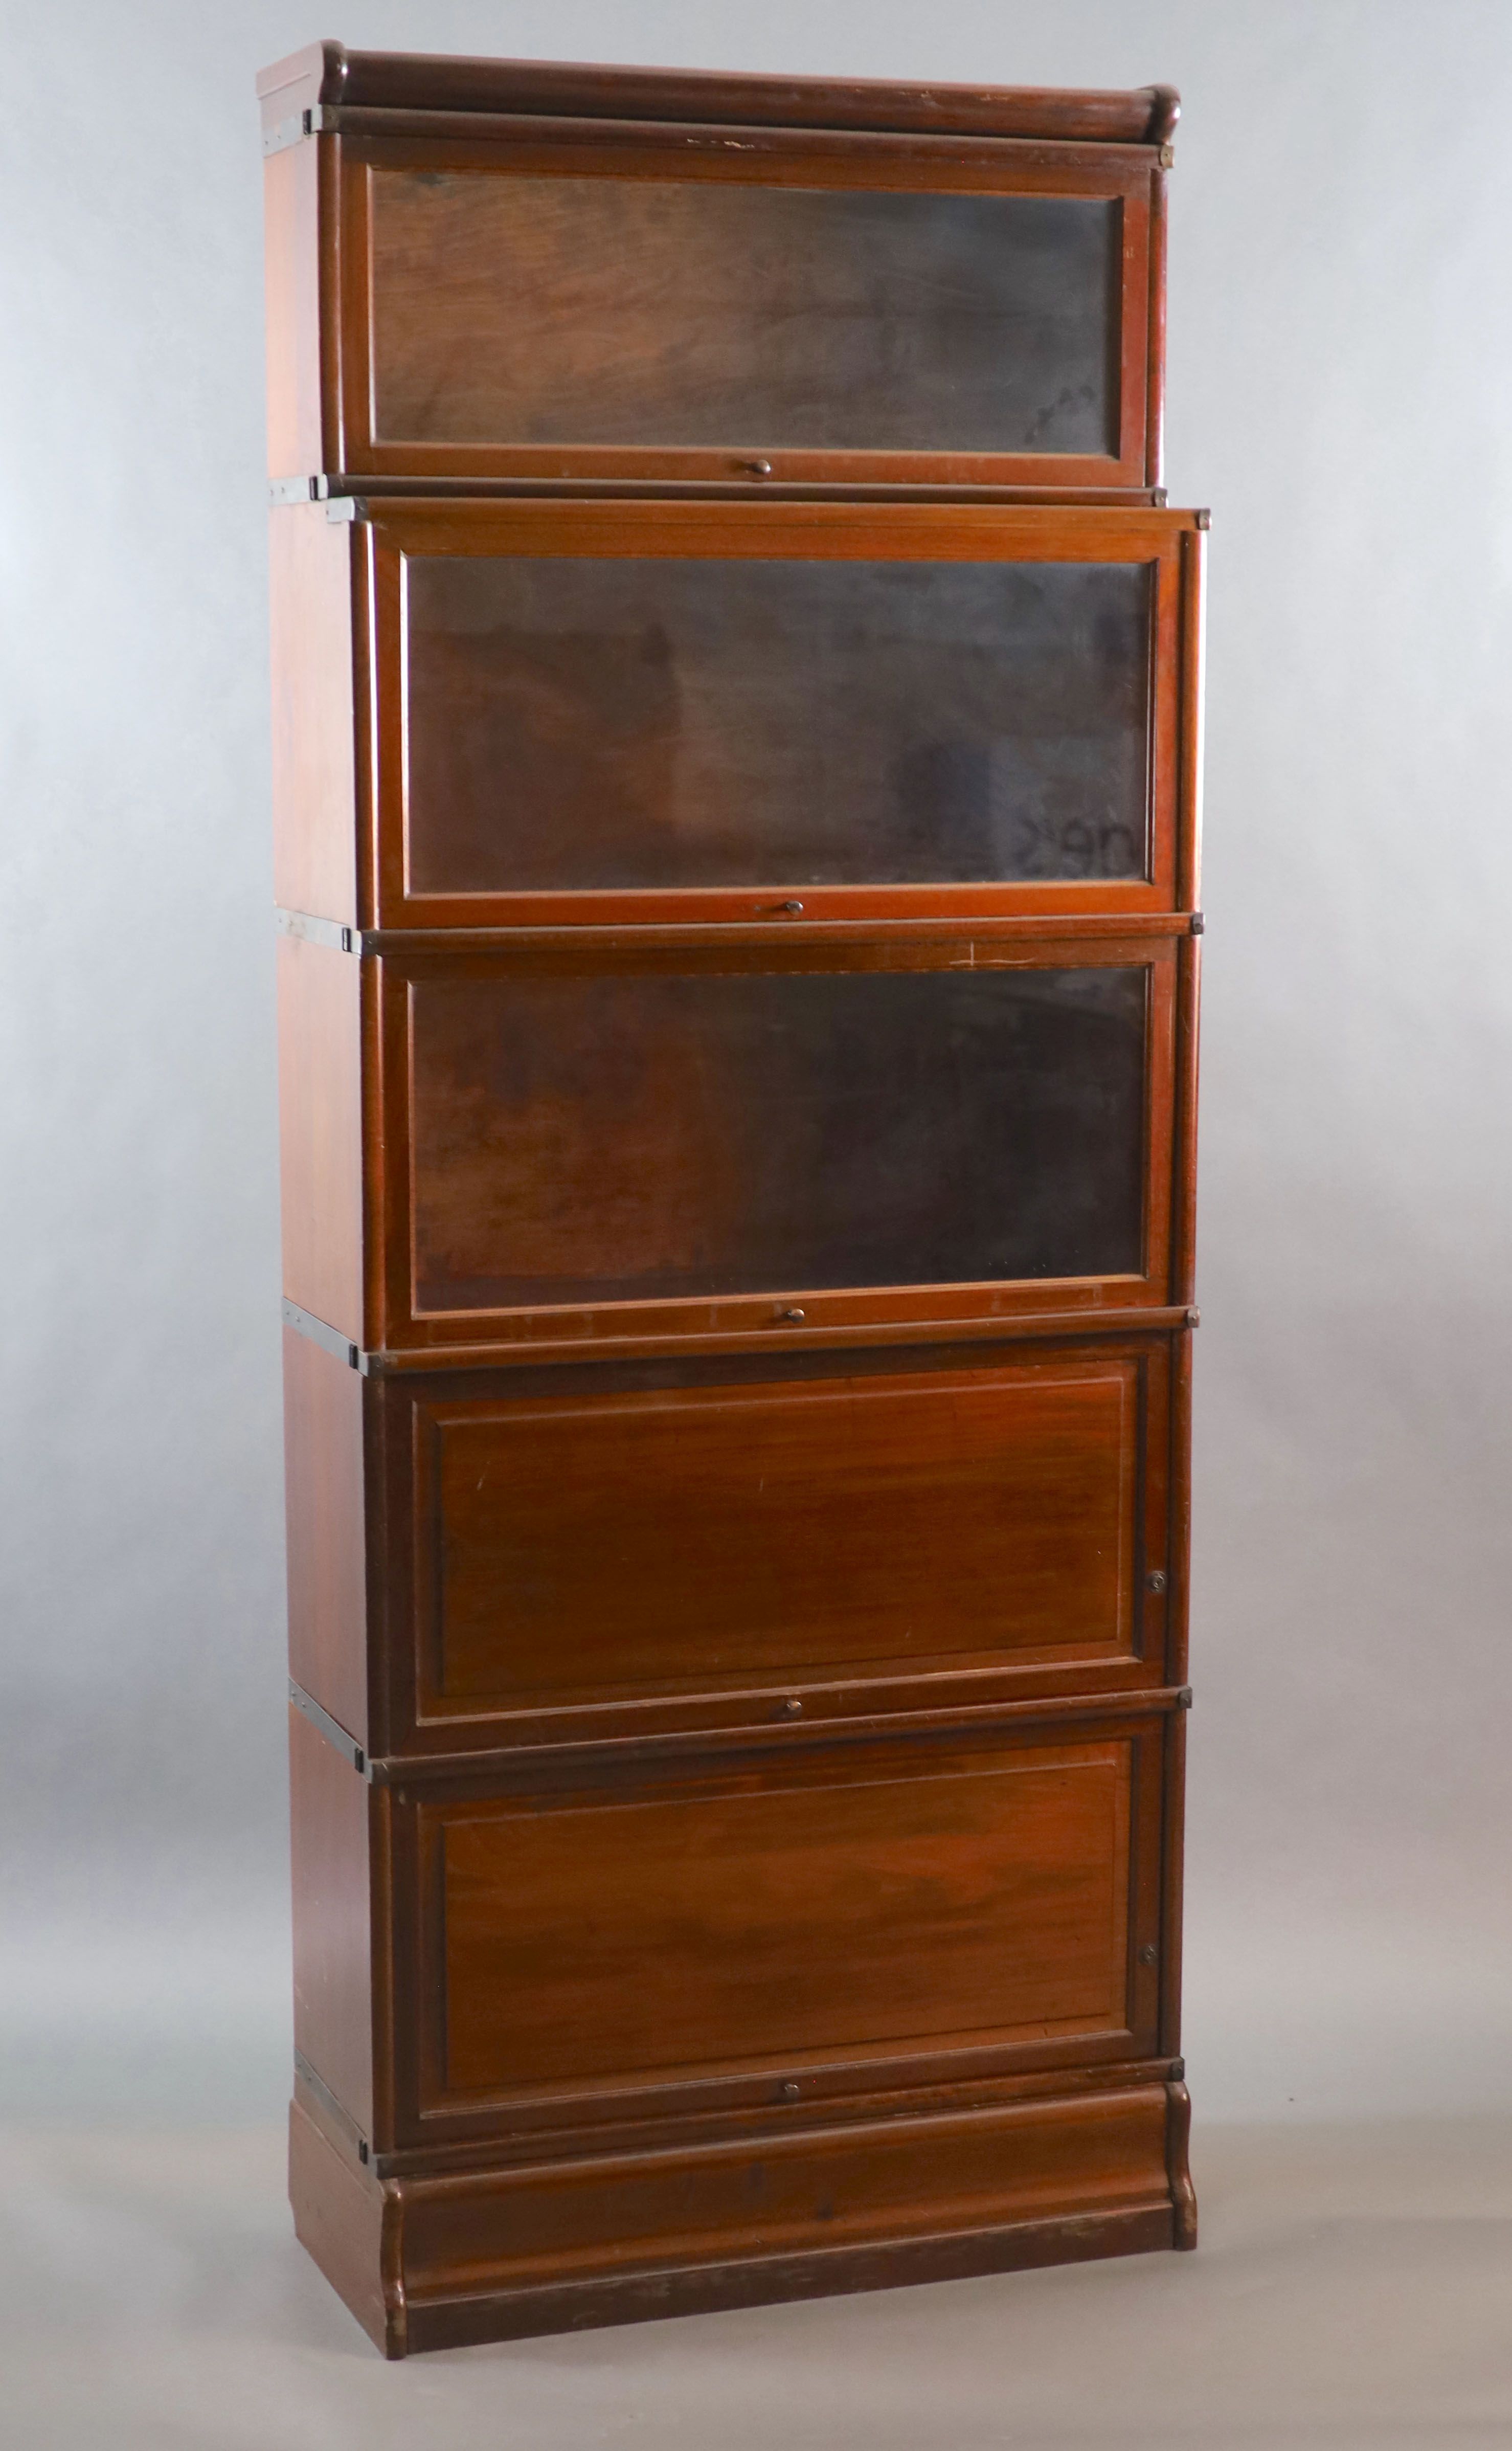 A Globe Wernicke mahogany sectional bookcase,with recessed glazed top tier over two glazed sections